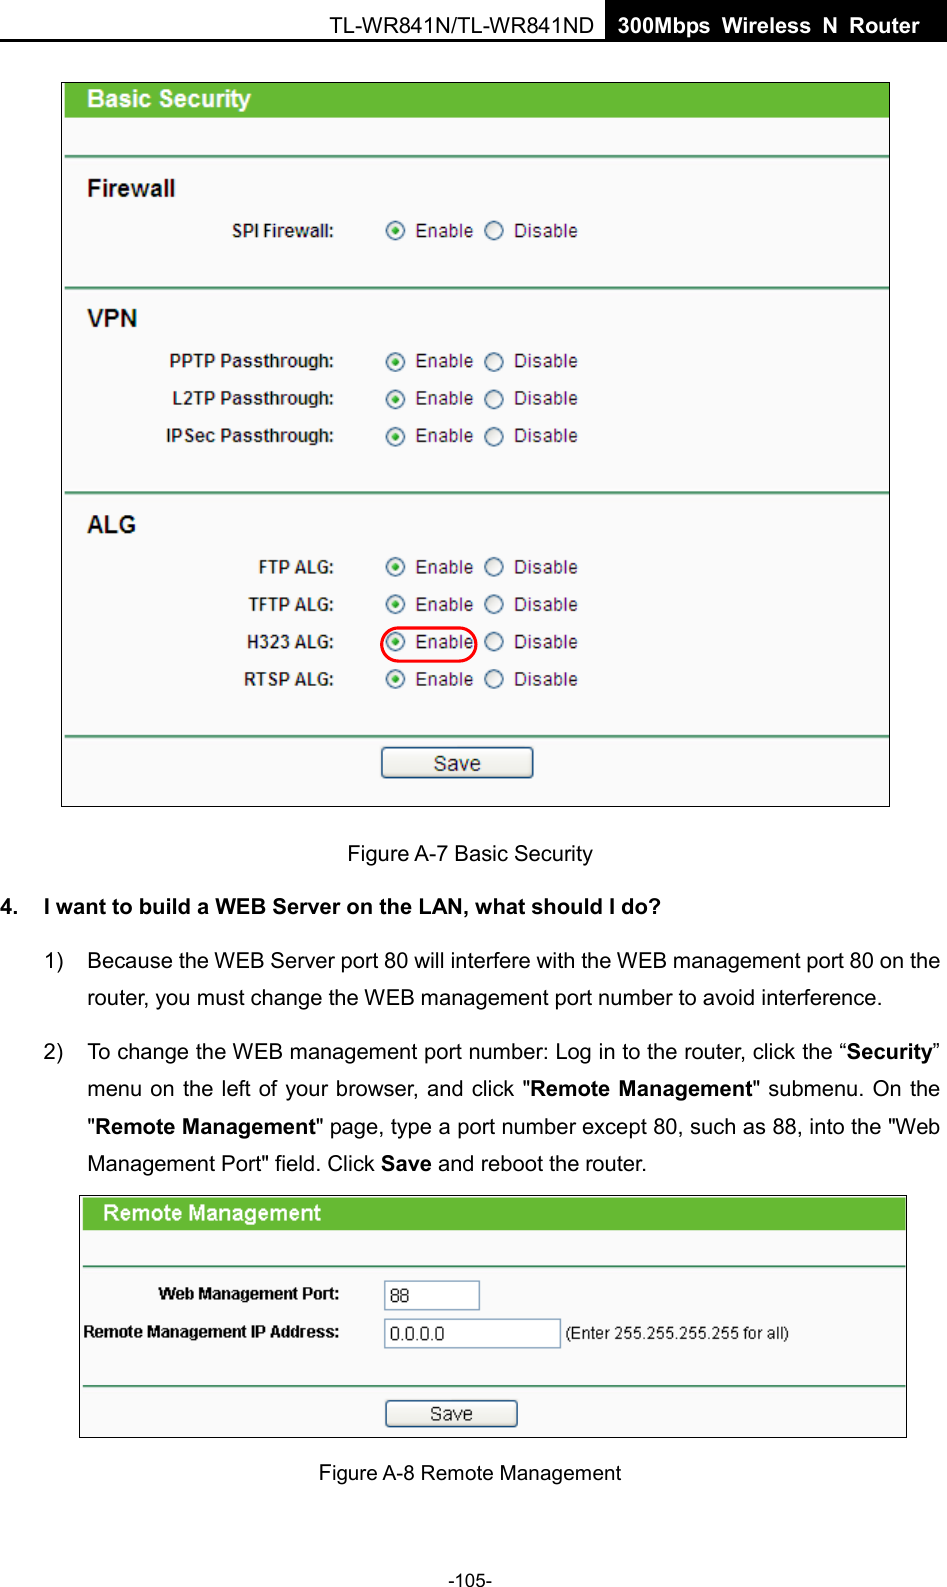  TL-WR841N/TL-WR841ND  300Mbps Wireless N Router       Figure A-7 Basic Security 4. I want to build a WEB Server on the LAN, what should I do? 1) Because the WEB Server port 80 will interfere with the WEB management port 80 on the router, you must change the WEB management port number to avoid interference. 2) To change the WEB management port number: Log in to the router, click the “Security” menu on the left of your browser, and click &quot;Remote Management&quot; submenu. On the &quot;Remote Management&quot; page, type a port number except 80, such as 88, into the &quot;Web Management Port&quot; field. Click Save and reboot the router.  Figure A-8 Remote Management -105- 